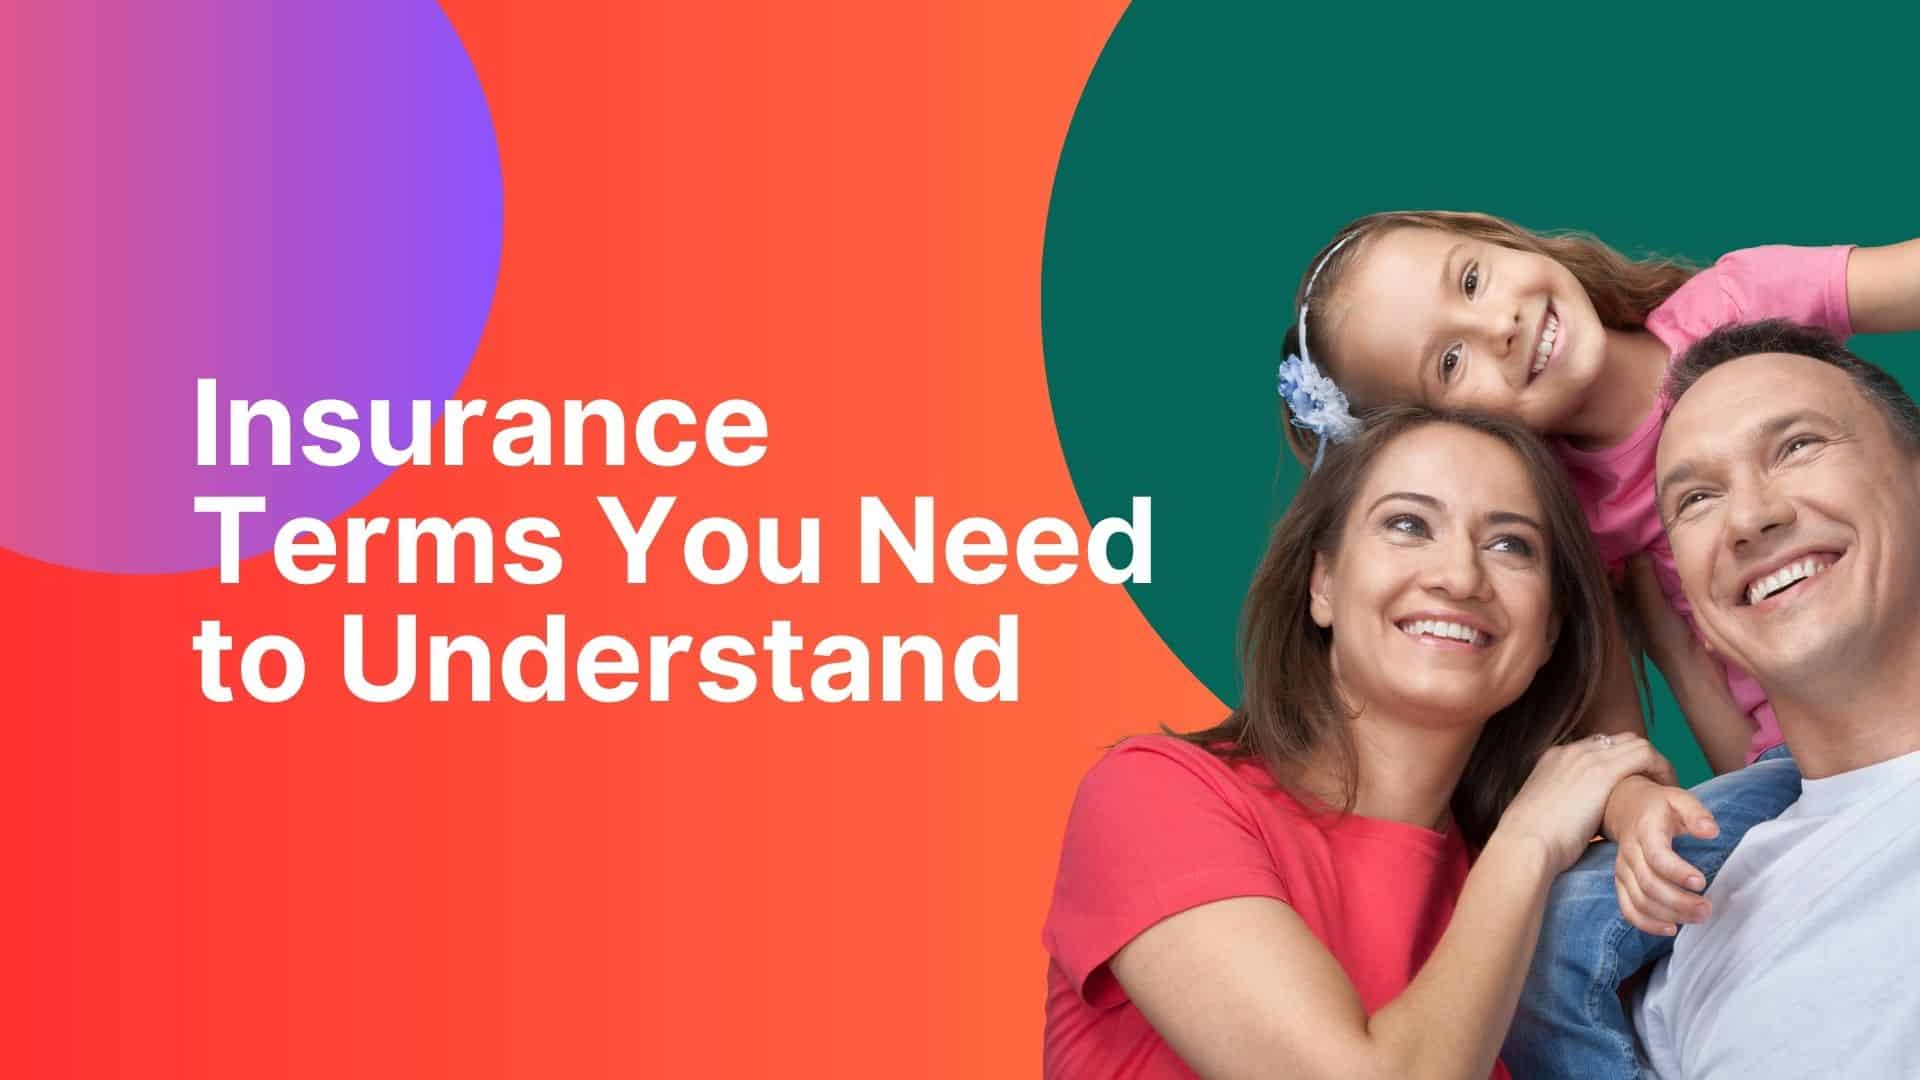 Insurance Terms You Need to Understand